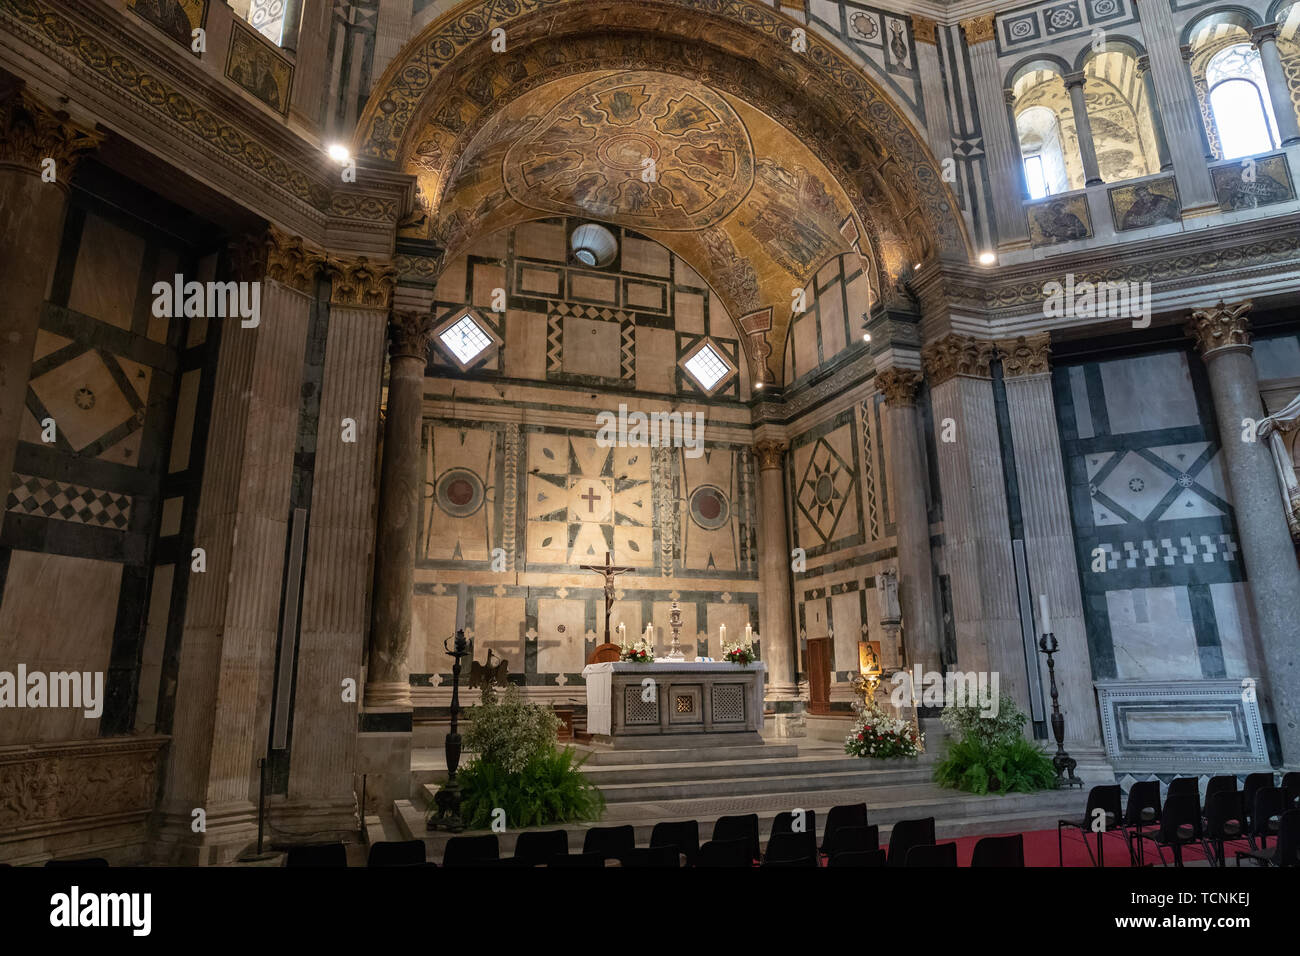 Florence, Italy - June 24, 2018: Panoramic view of interior of Florence Baptistery (Battistero di San Giovanni) on Piazza del Duomo. It is religious b Stock Photo